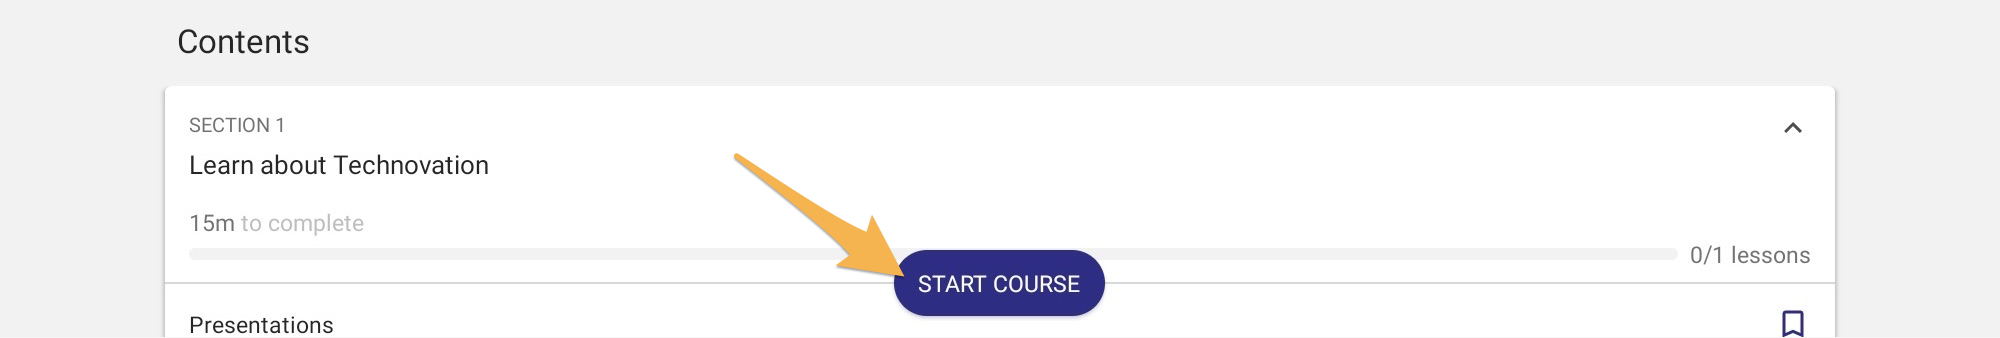 courses-android-5.png